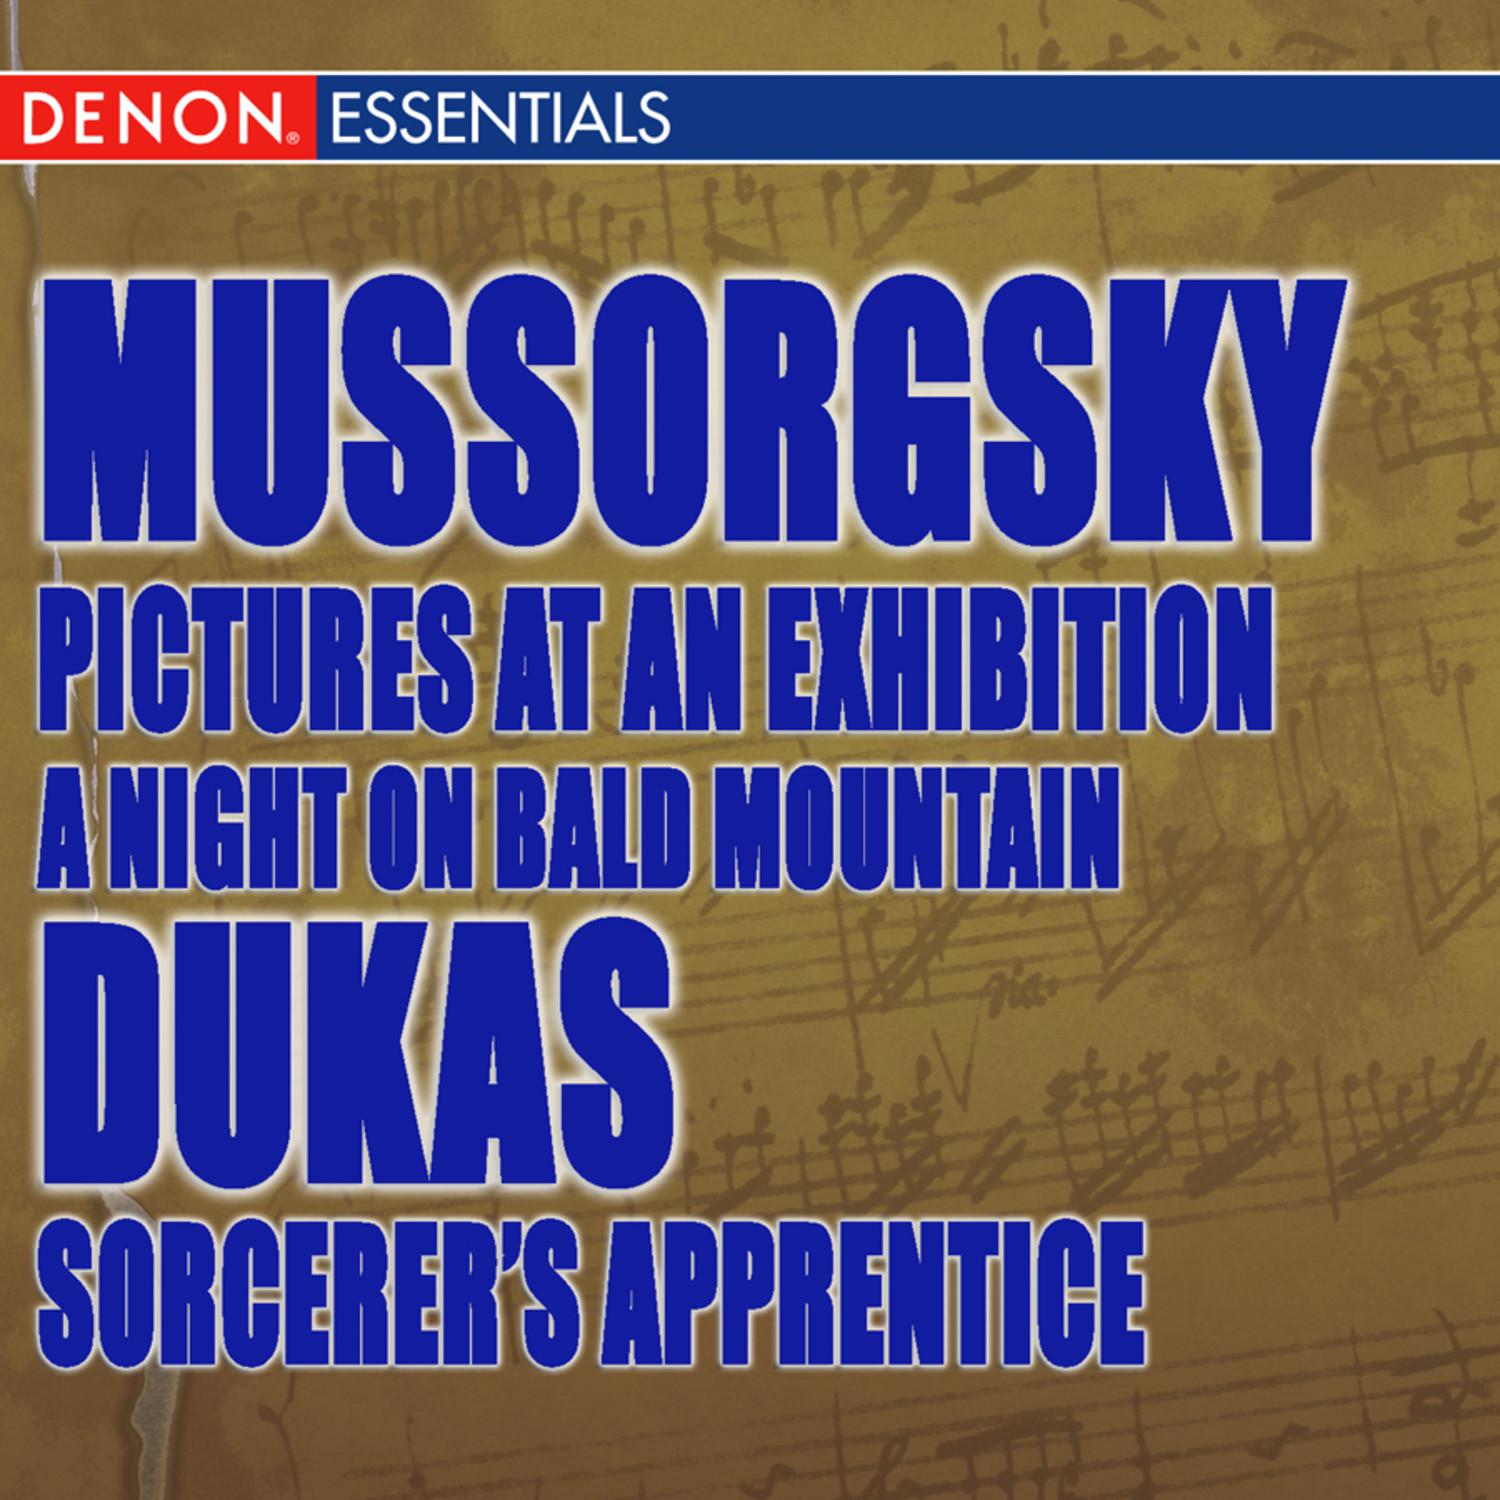 Mussorgsky: A Night on Bald Mountain - Pictures at an Exhibition; Dukas: Sorcerer's Apprentice